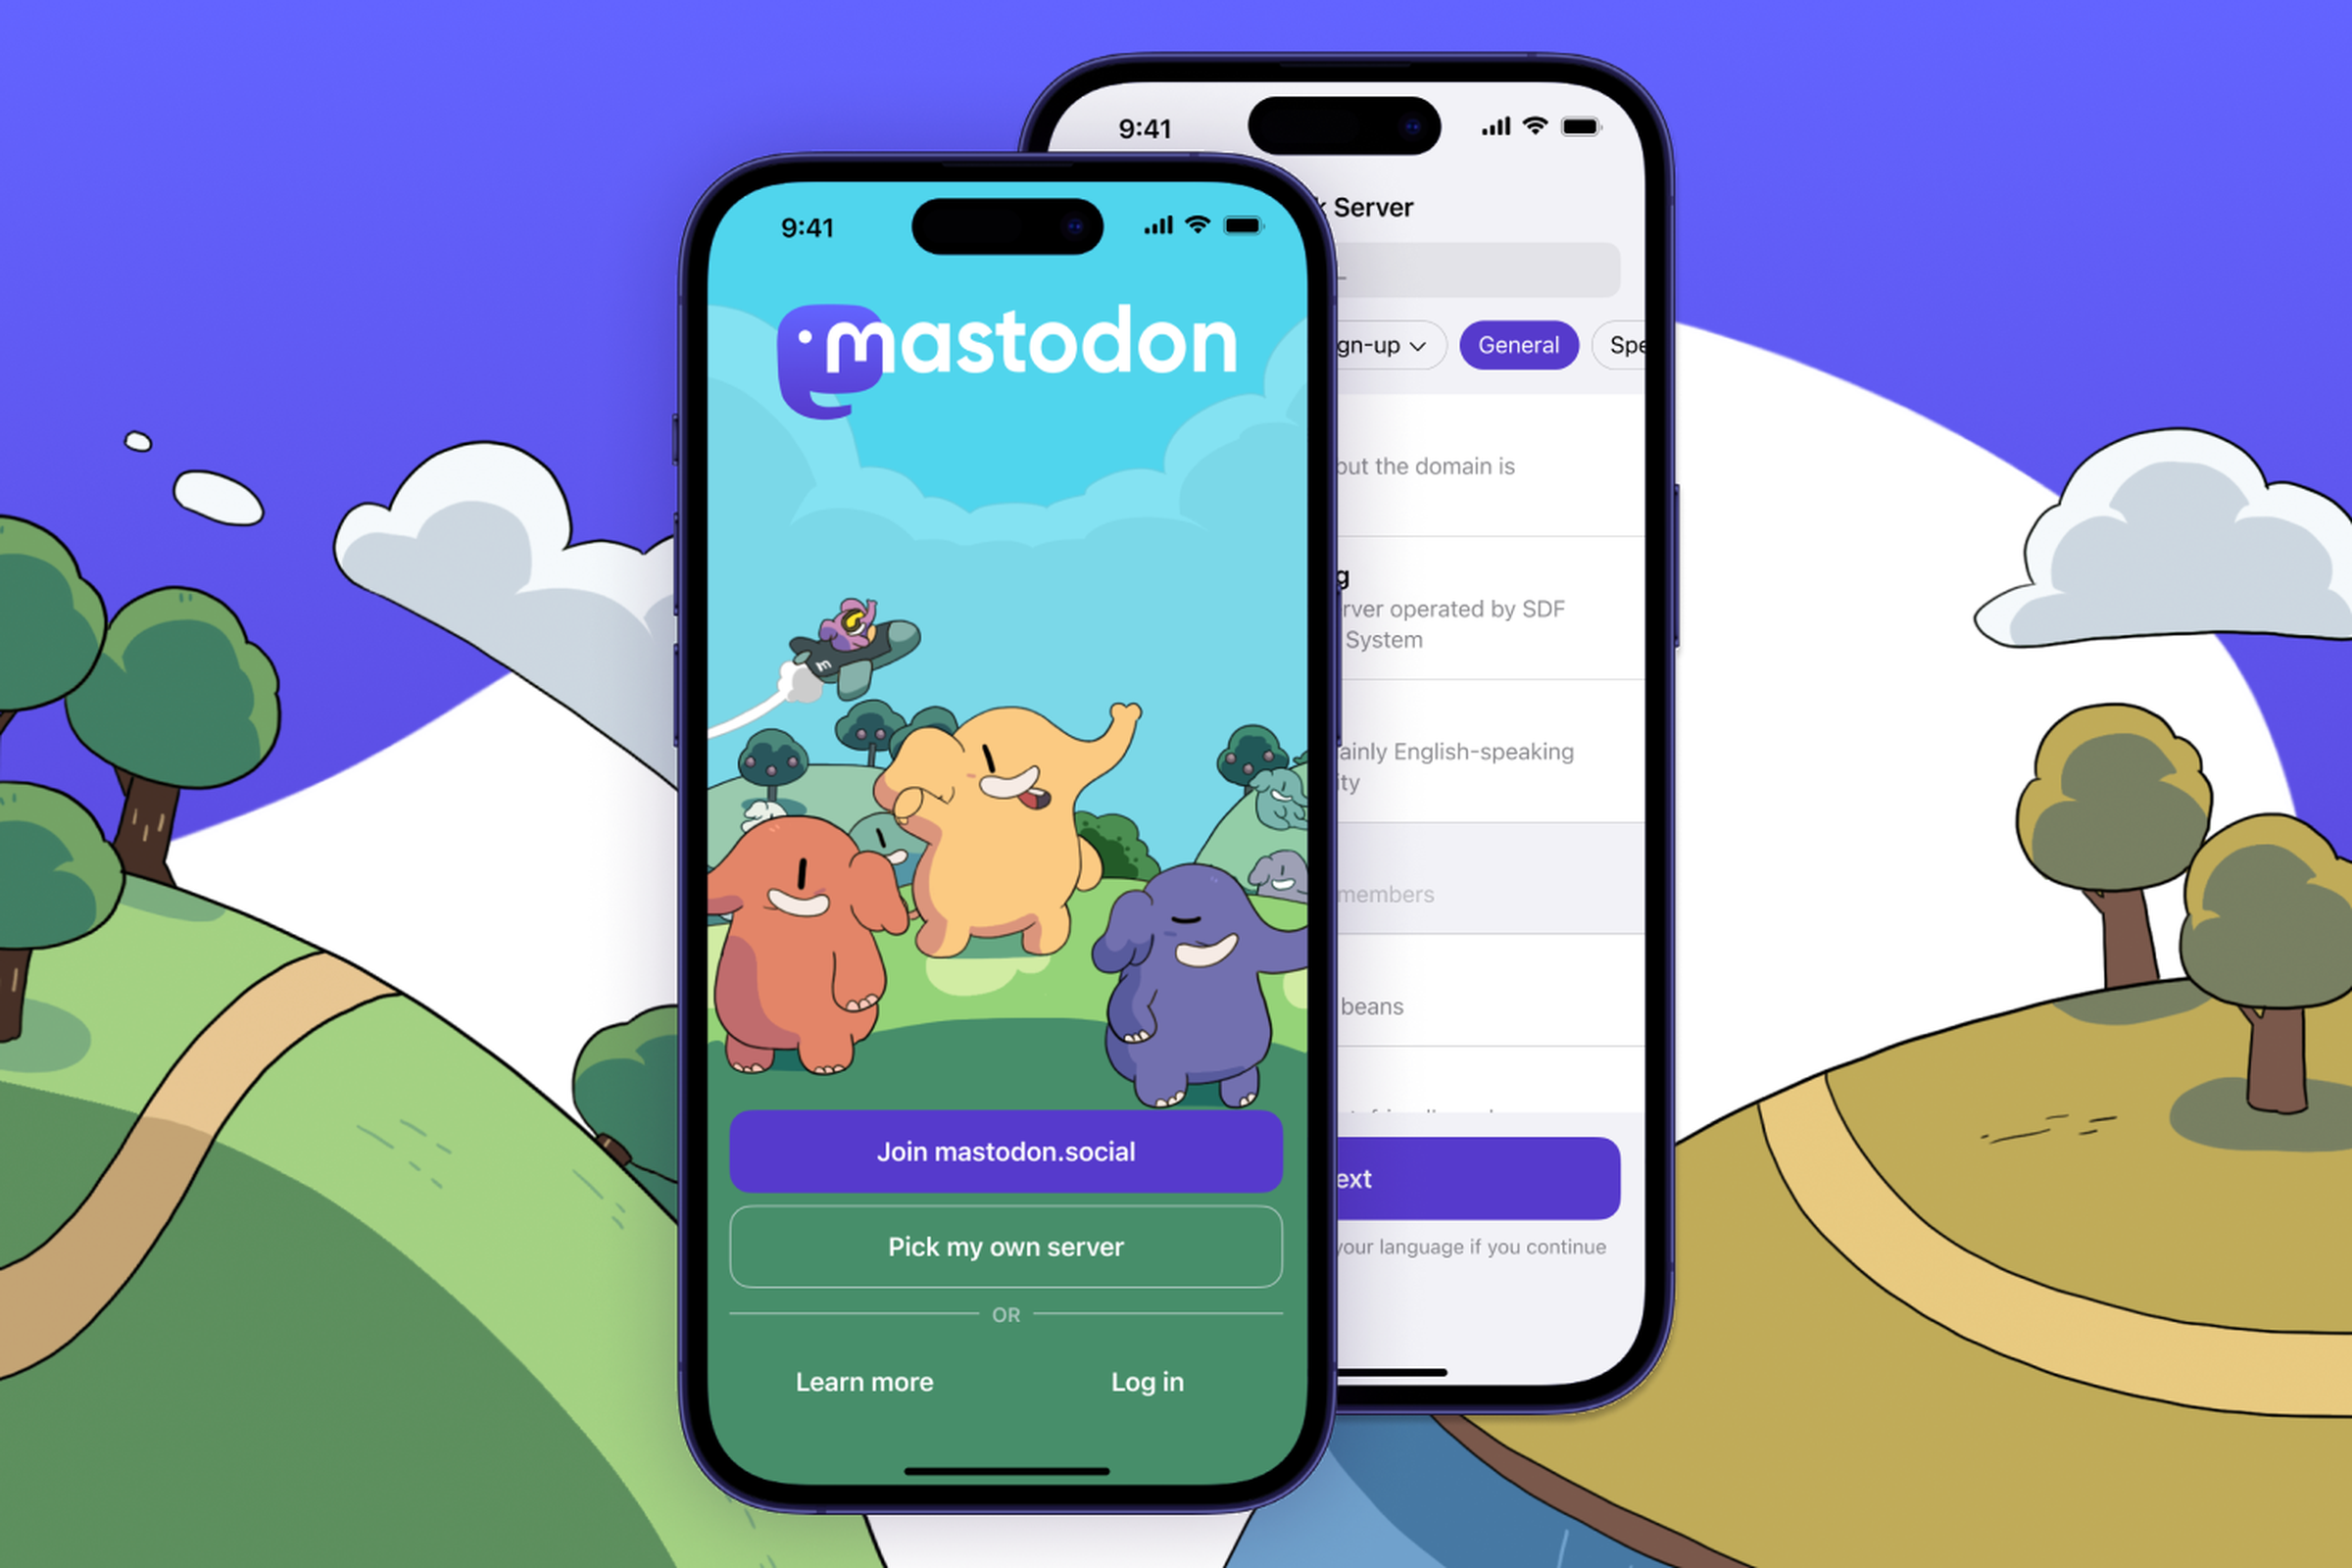 An image showing Mastodon’s sign up page on mobile